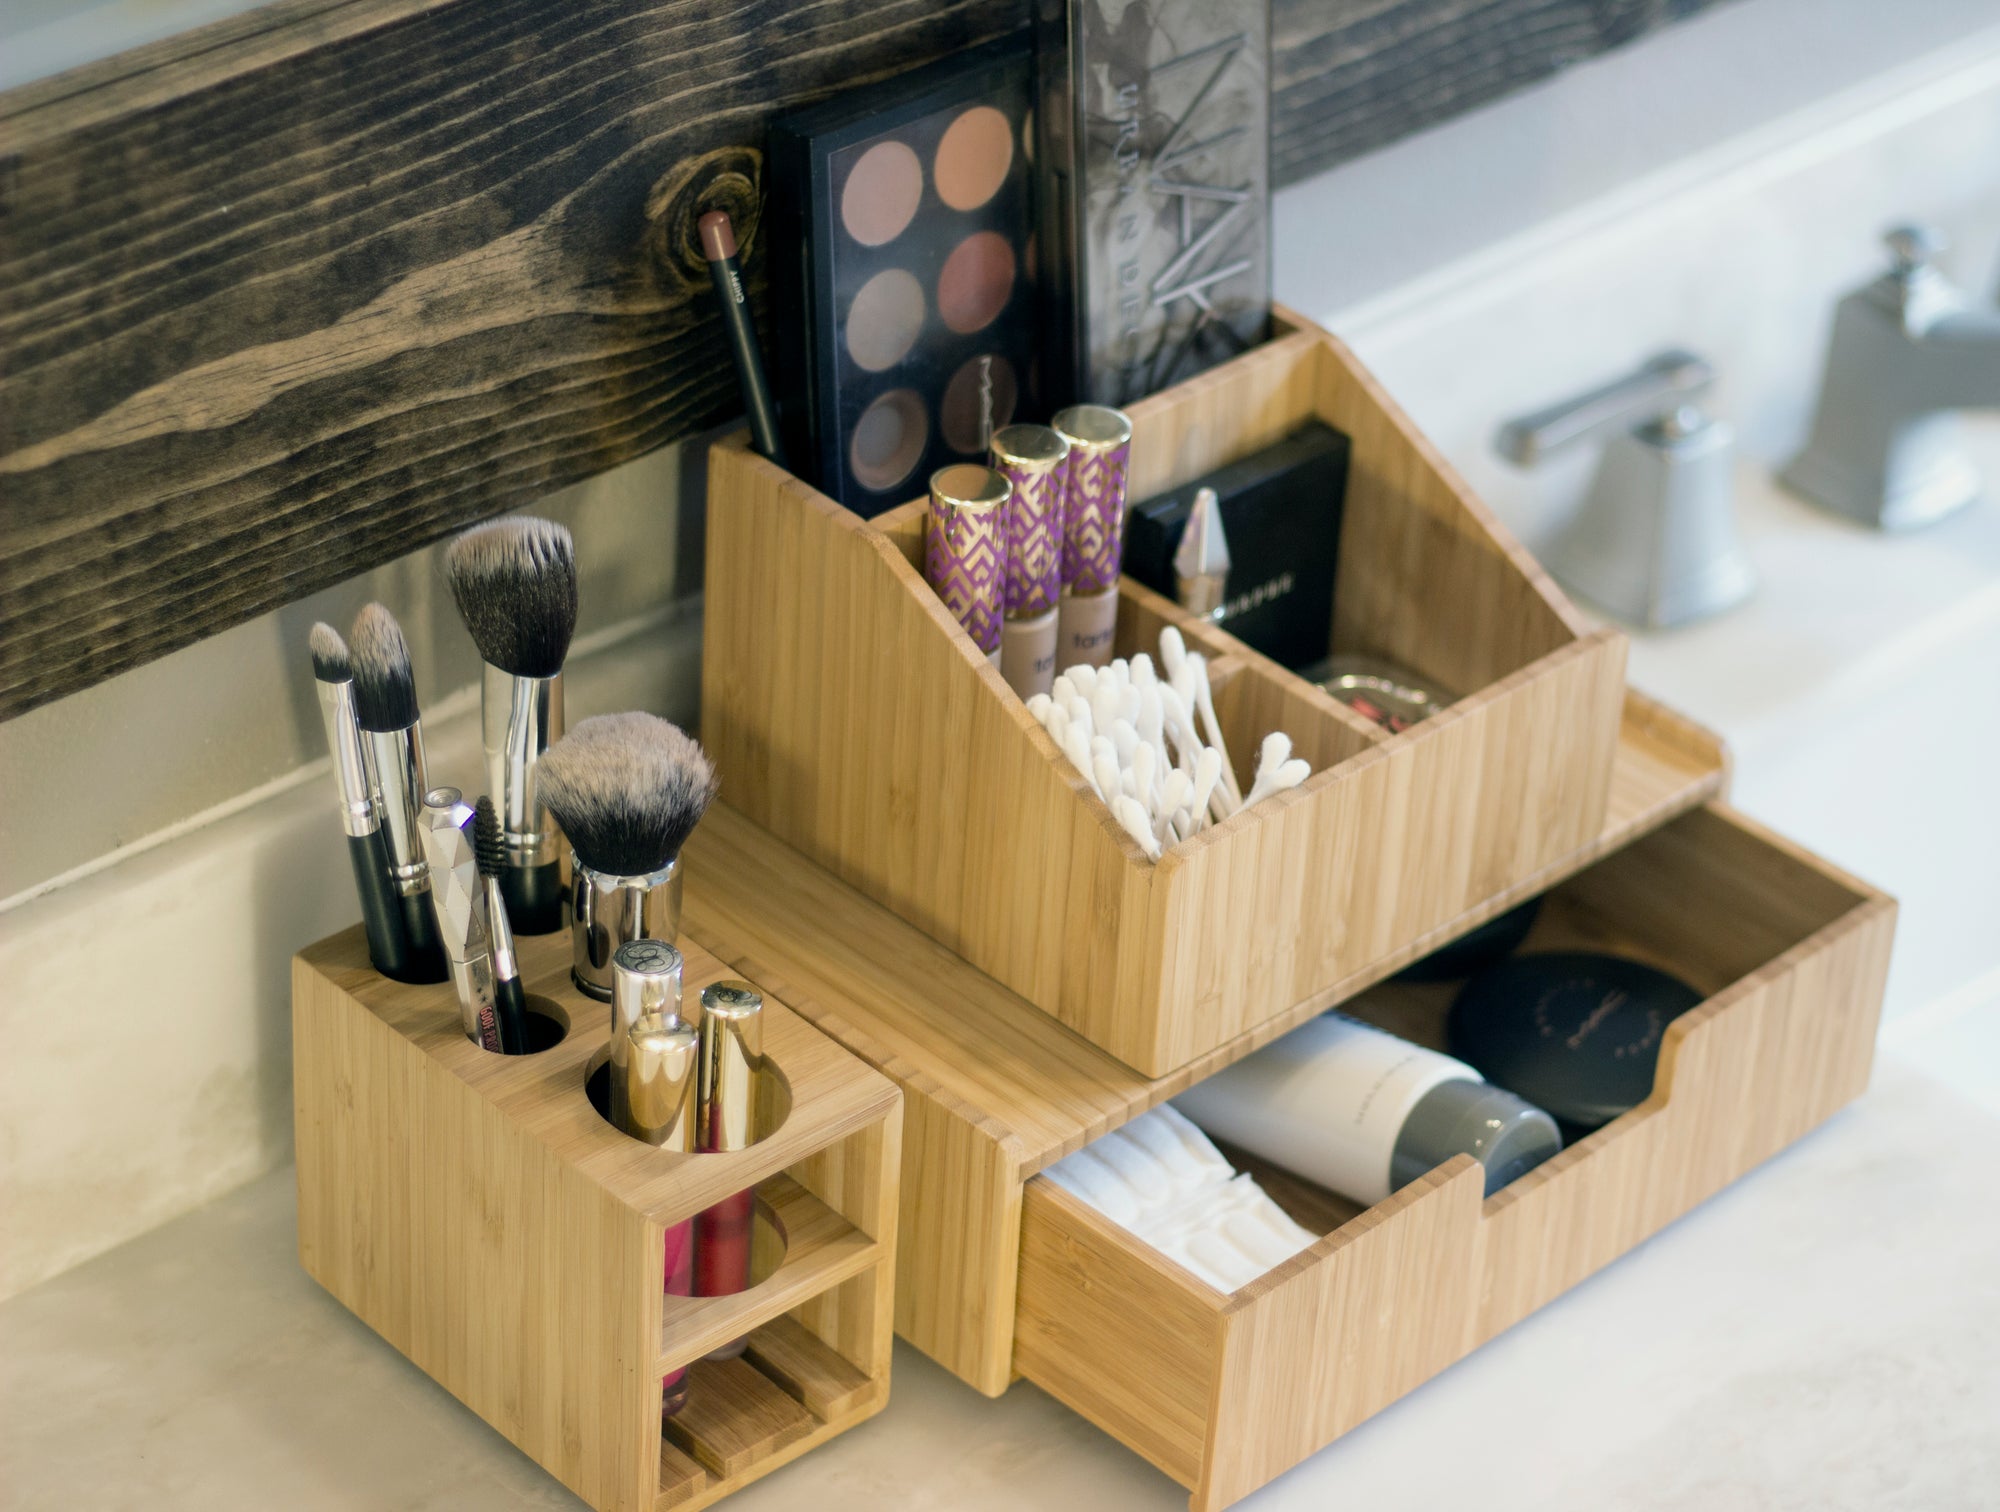 Mobilevision Bamboo Makeup Organizer Complete Combo, 3 PC Set Includes: 5 Section Brush Holder, 4 Compartment Cosmetic Caddy & Drawer for Added